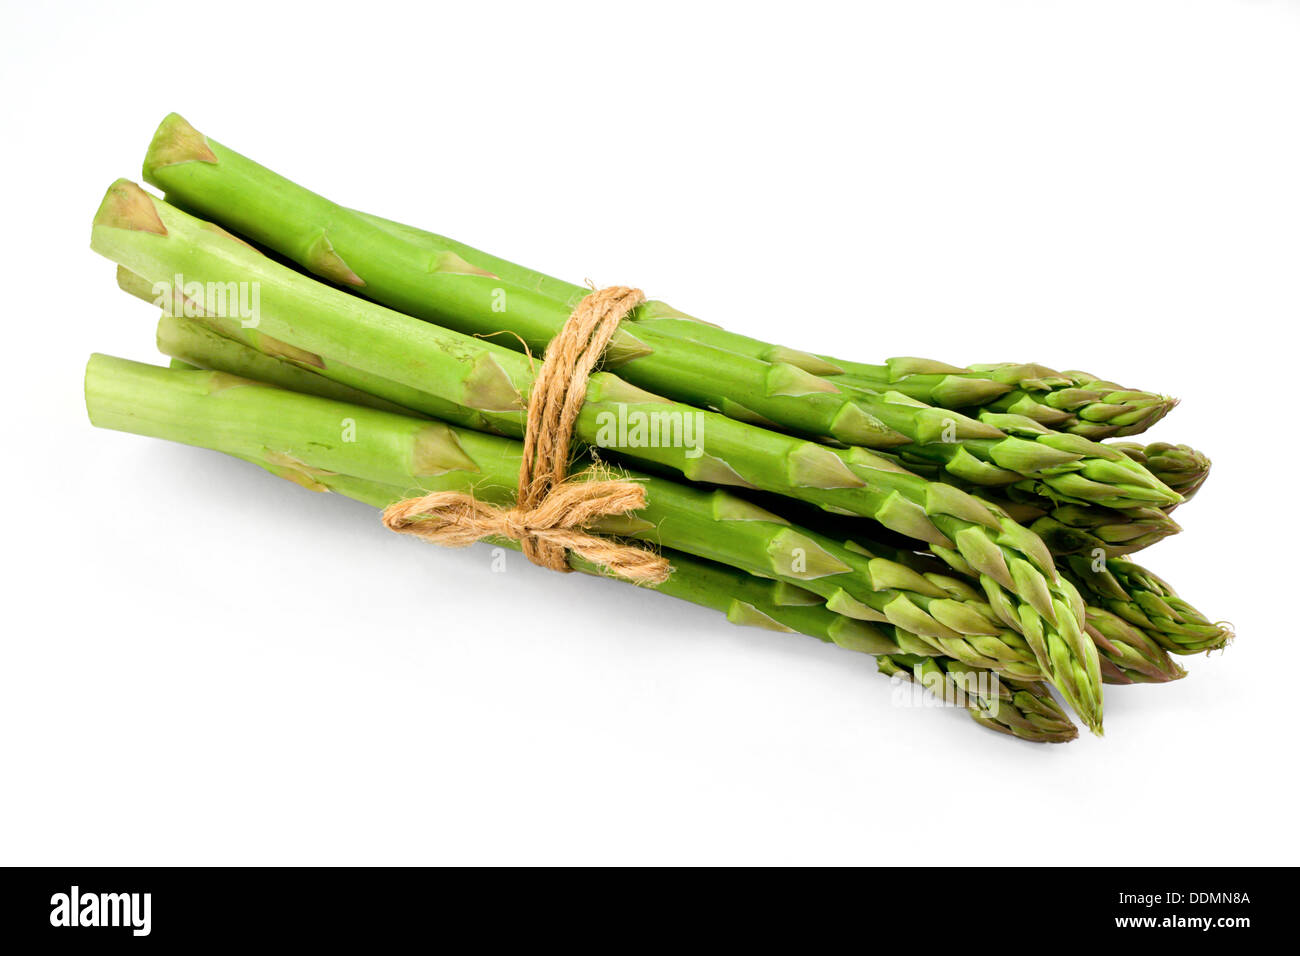 Asparagus bunch a premium seasonal vegetable isolated on a white background with light shadow Stock Photo